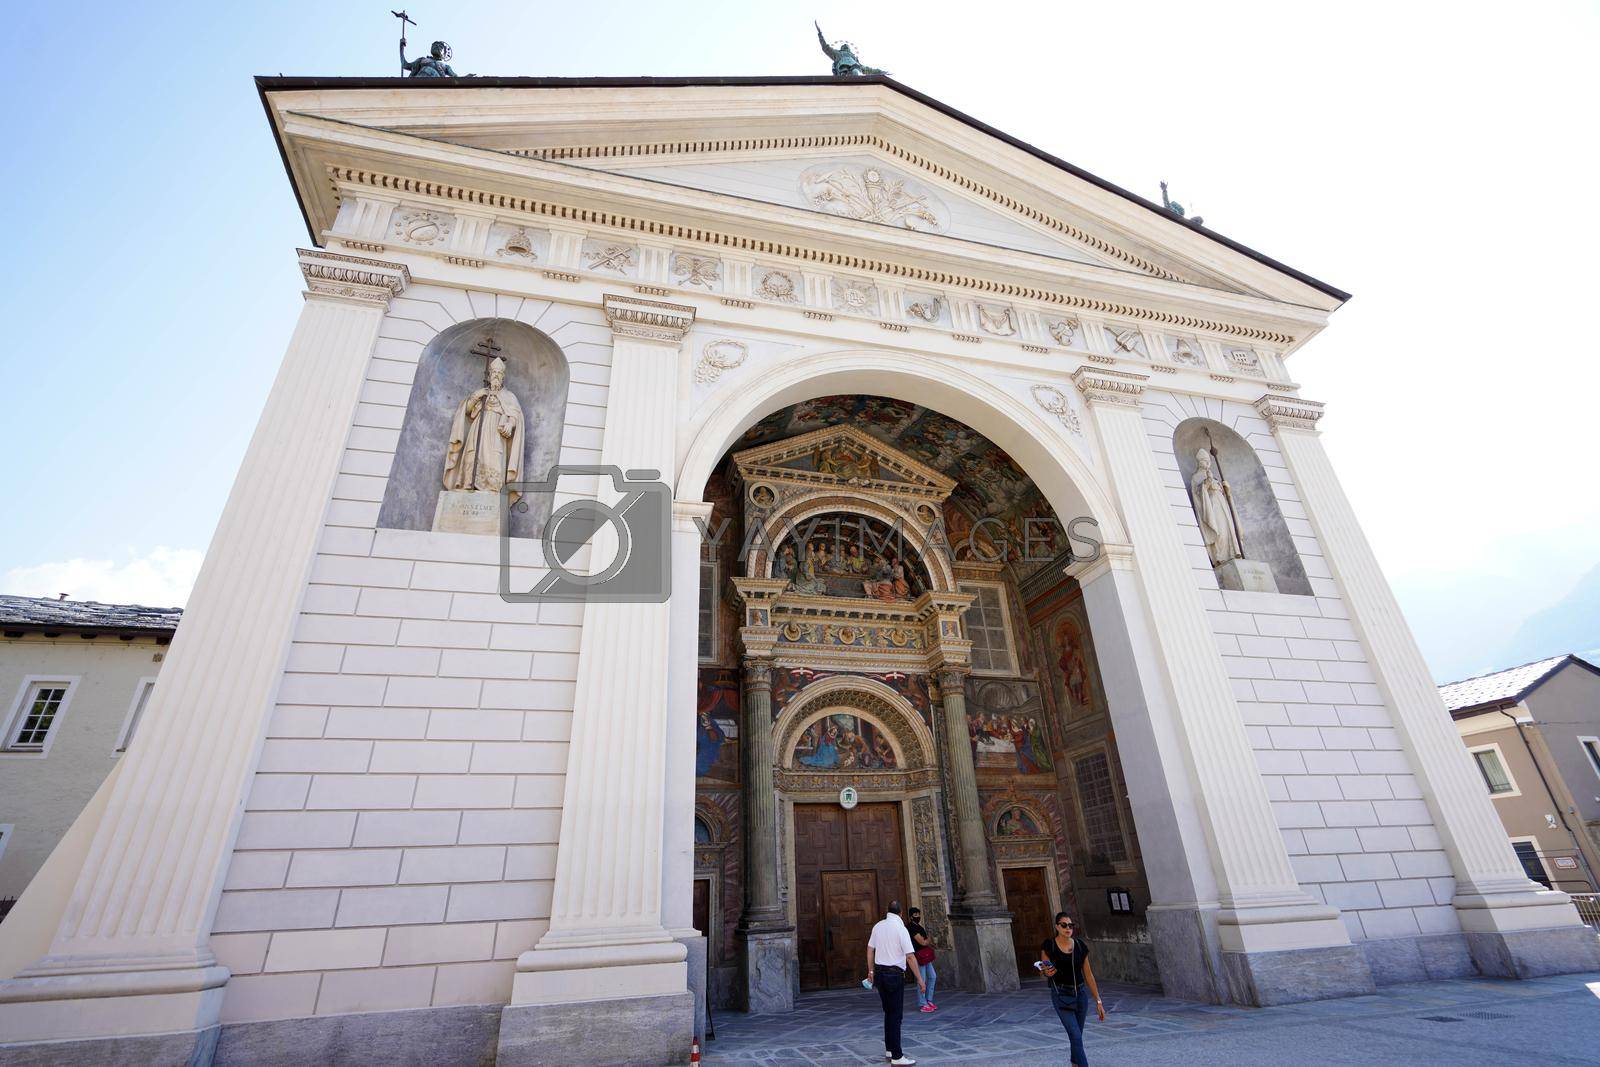 AOSTA, ITALY - AUGUST 20, 2021: Aosta Cathedral dedicated to the Assumption of the Virgin Mary and Saint John the Baptist